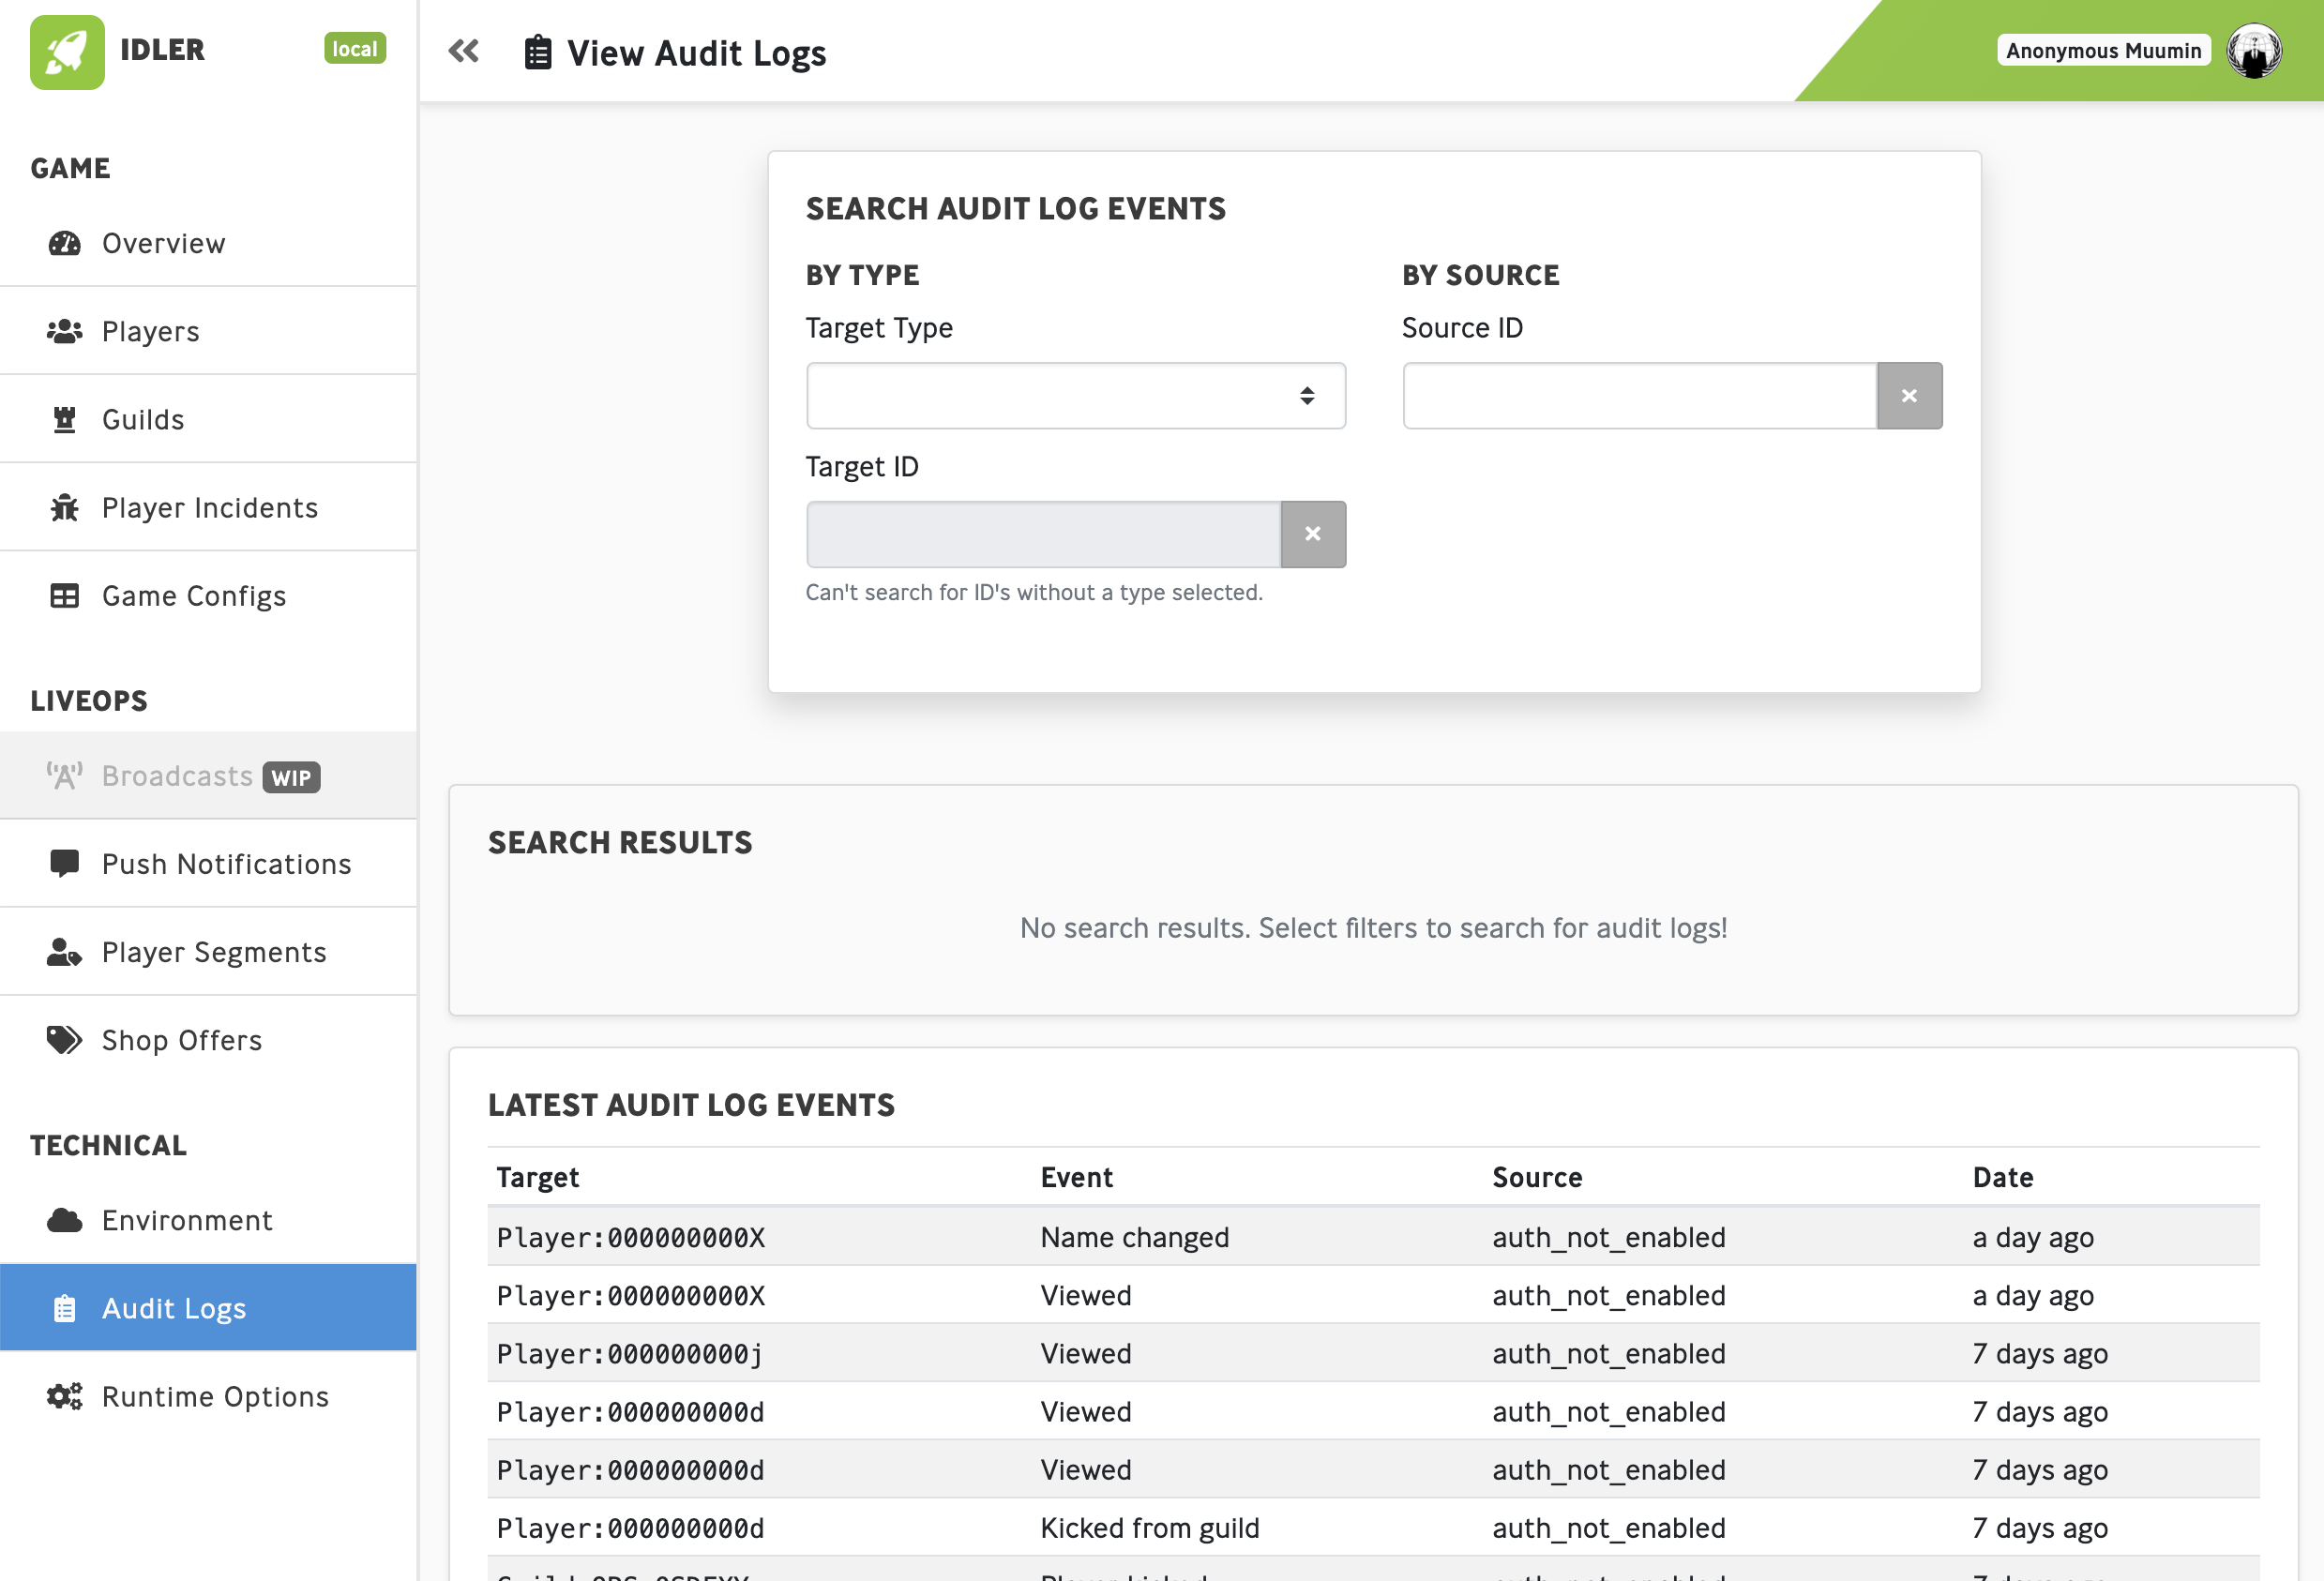 Dedicated audit logs page for browsing all logs.